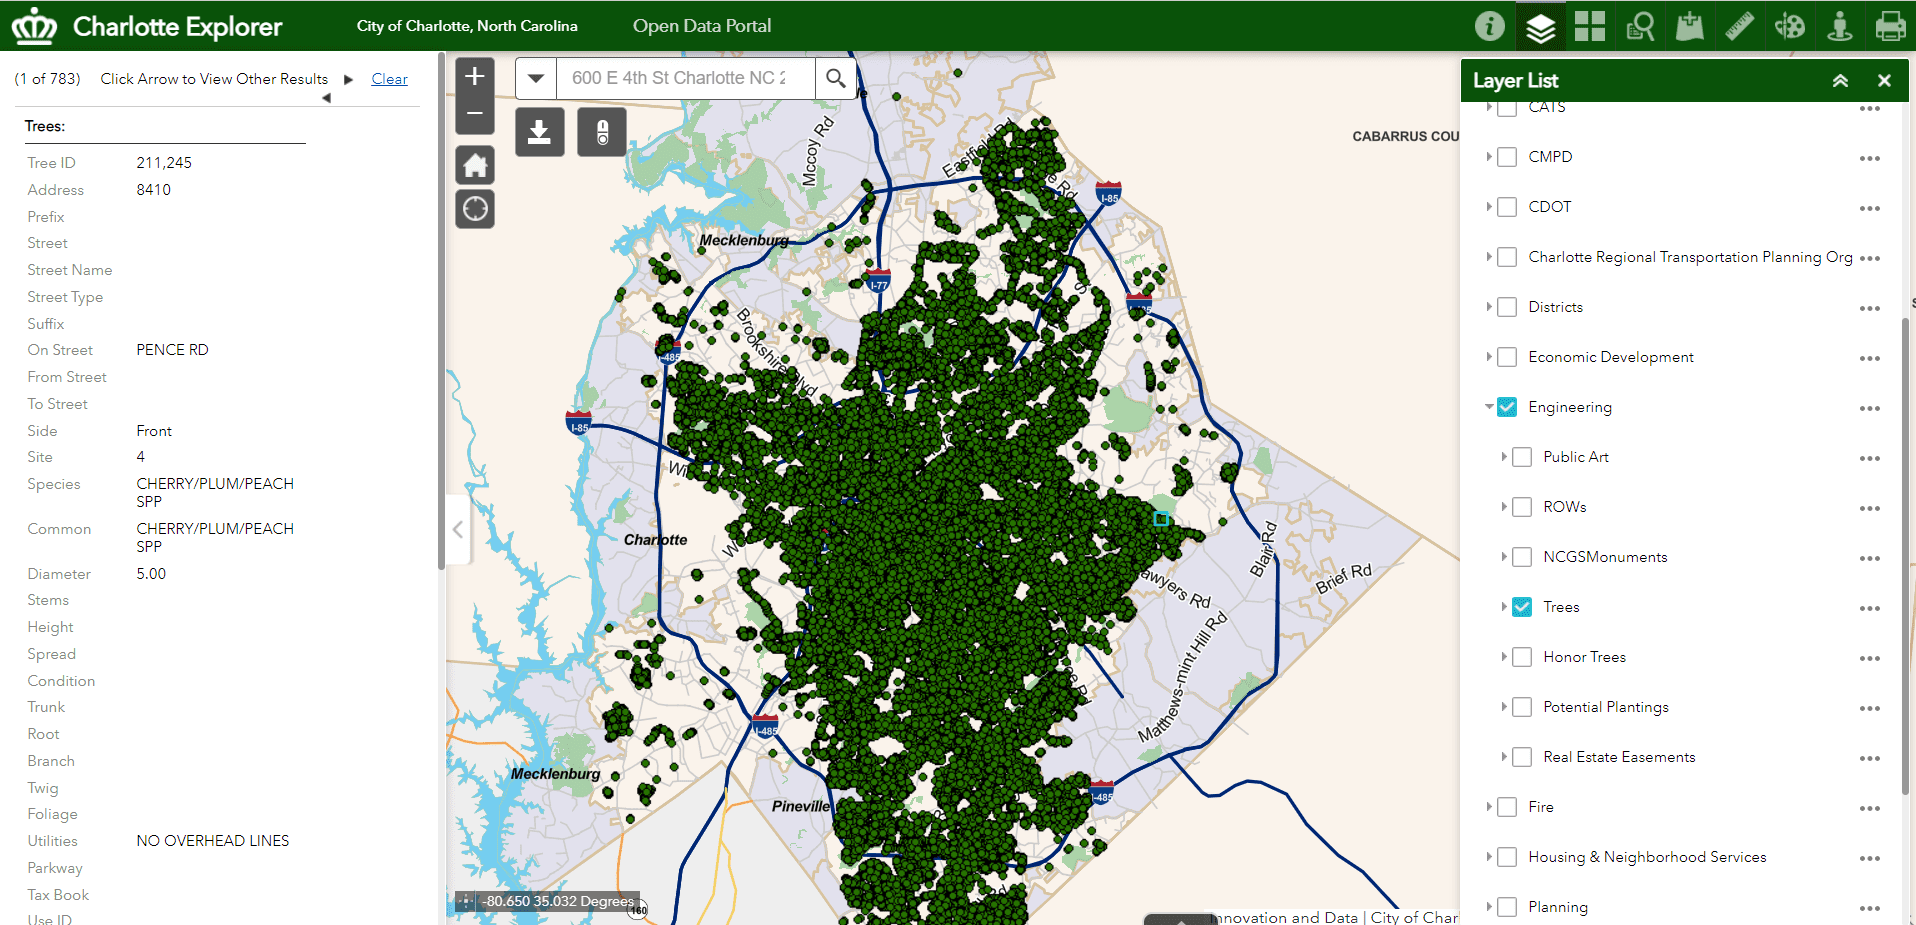 A dot map of the city of Charlotte's trees